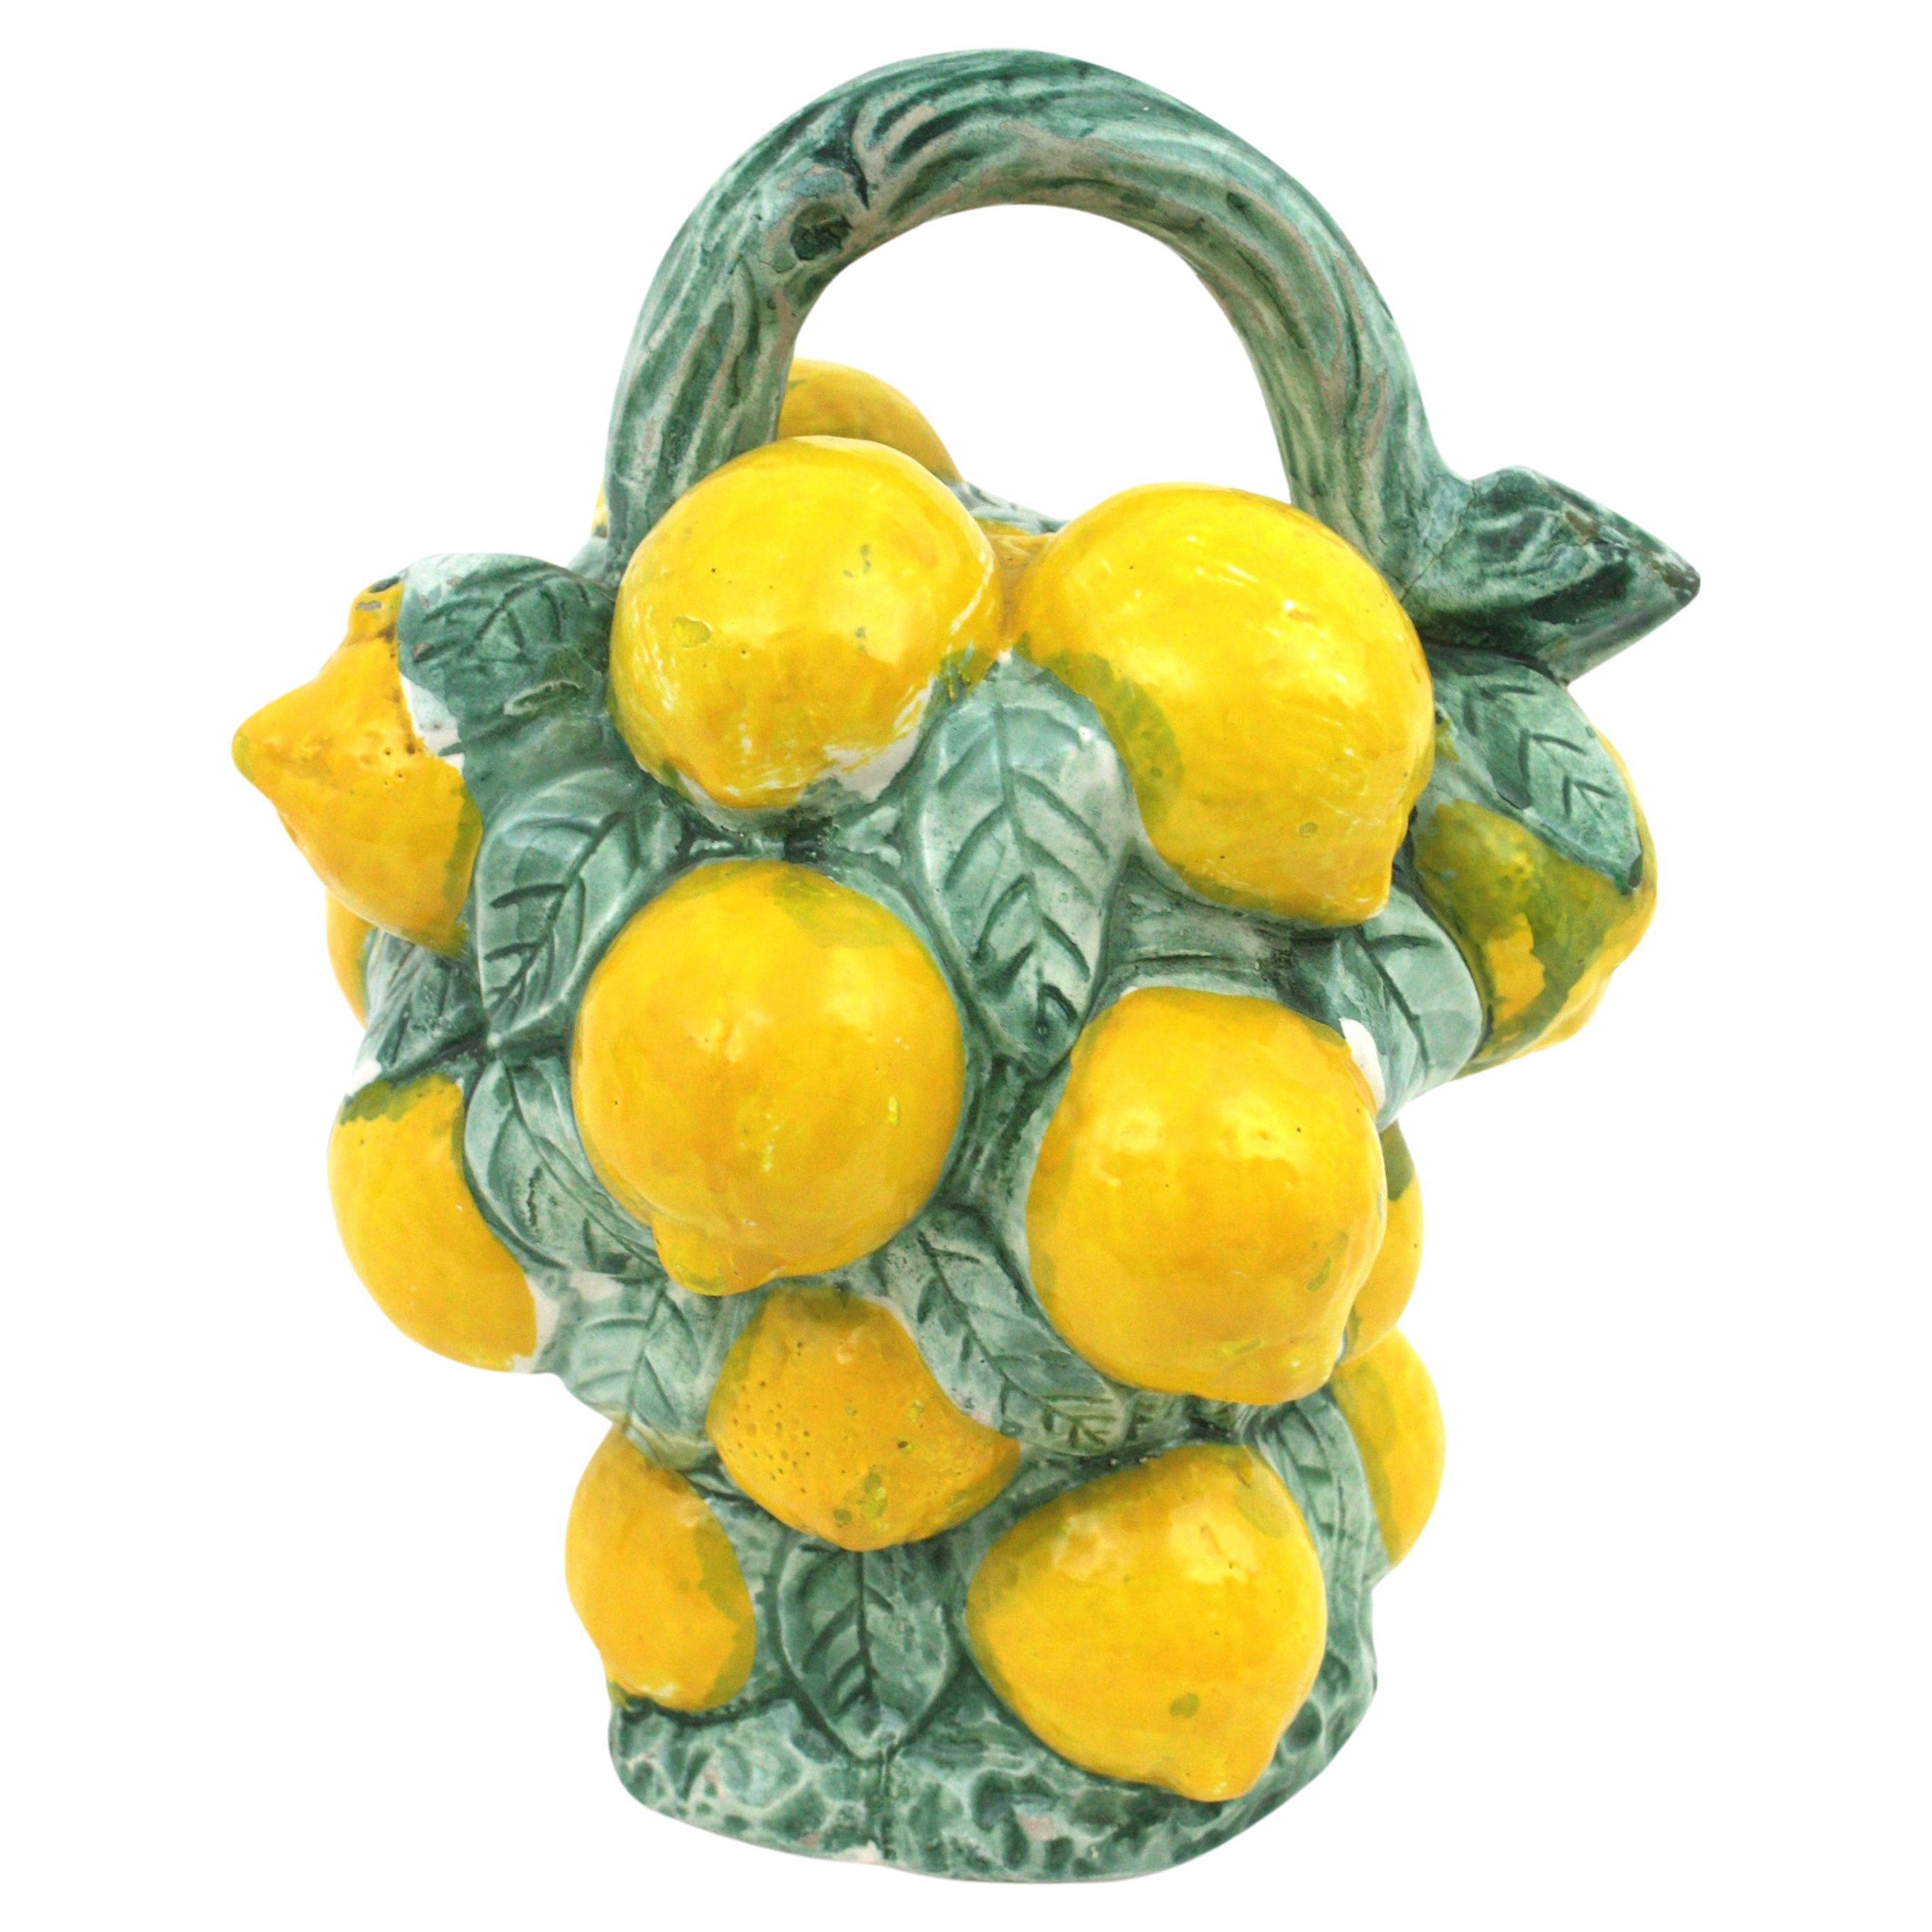 Eye-catching realistic Majolica lemons jug / pitcher in multicolor glazed ceramic,  Spain, 1950s-1960s.
Hand-painted Manises ceramic decorative jug in the shape of a bunch of lemons in green and yellow glazed ceramic.
A cool accent to any kitchen or